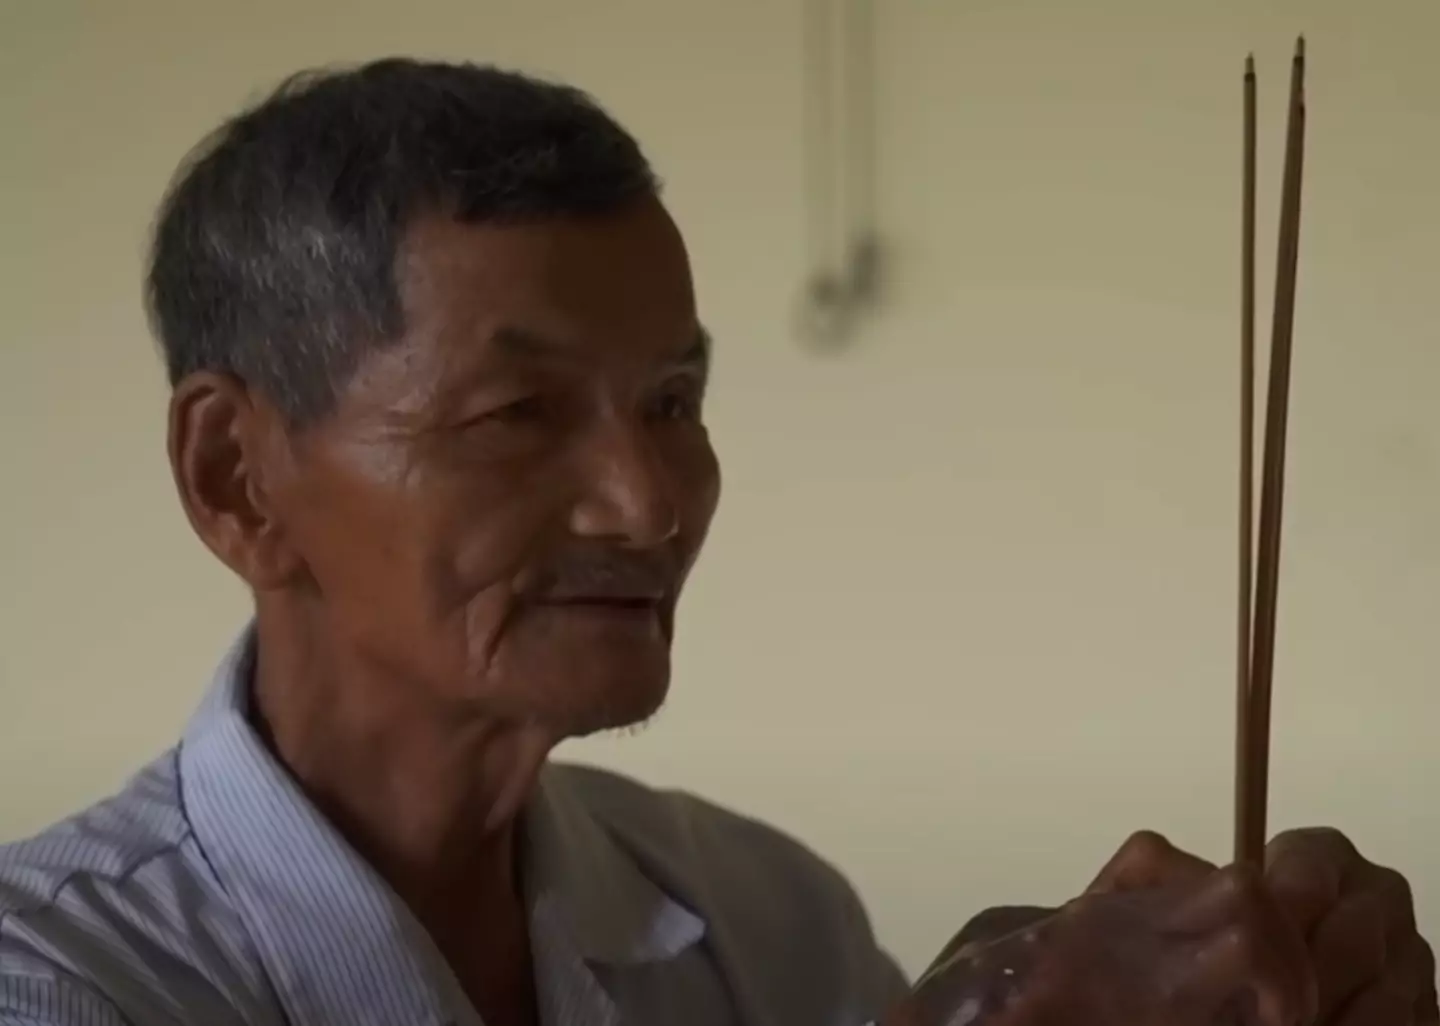 Ngoc believes his lack of sleep stems from a fever he suffered in 1962 during his childhood.